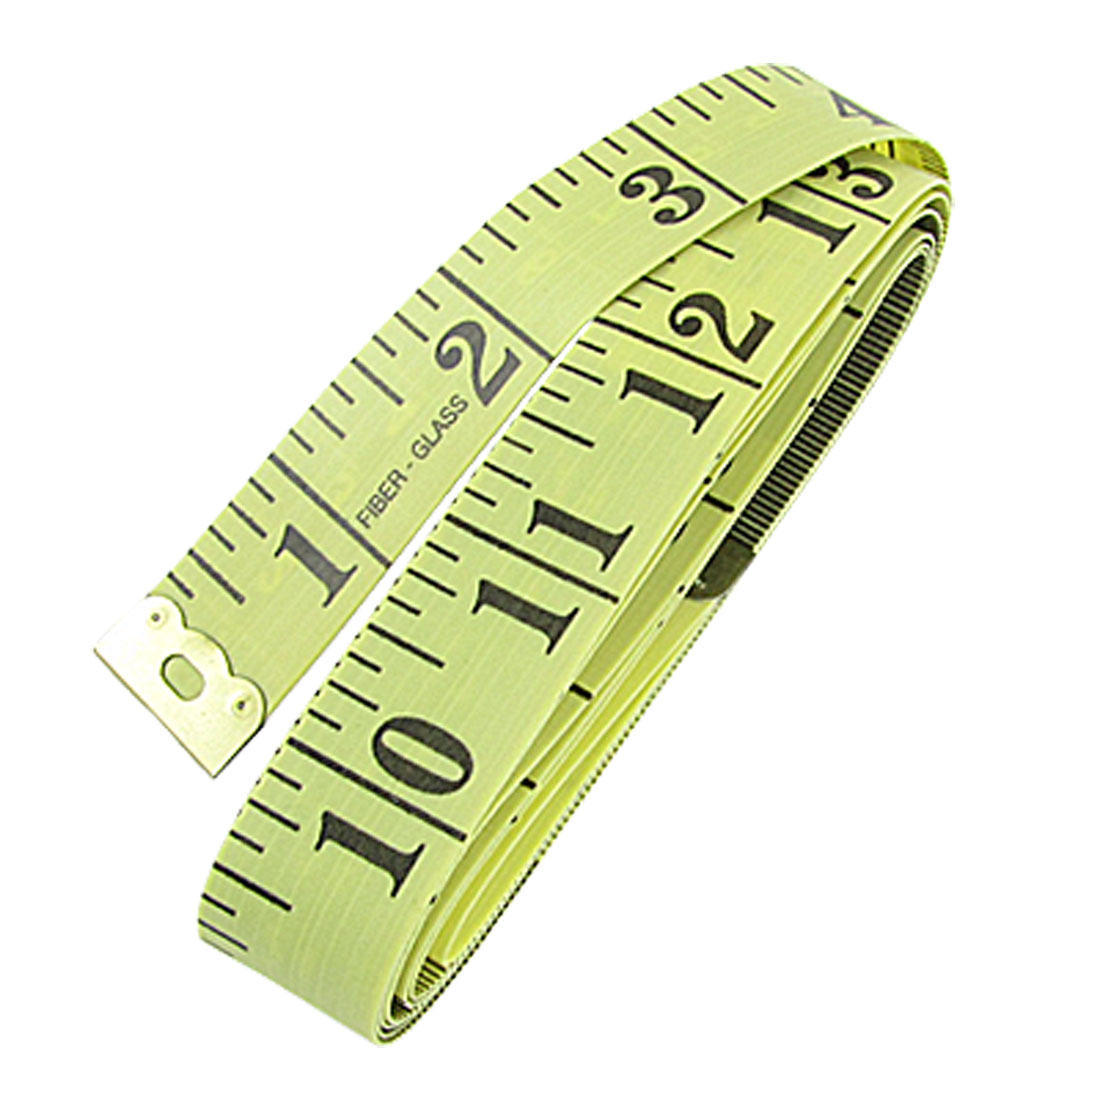 Metric ruler clipart free images 2